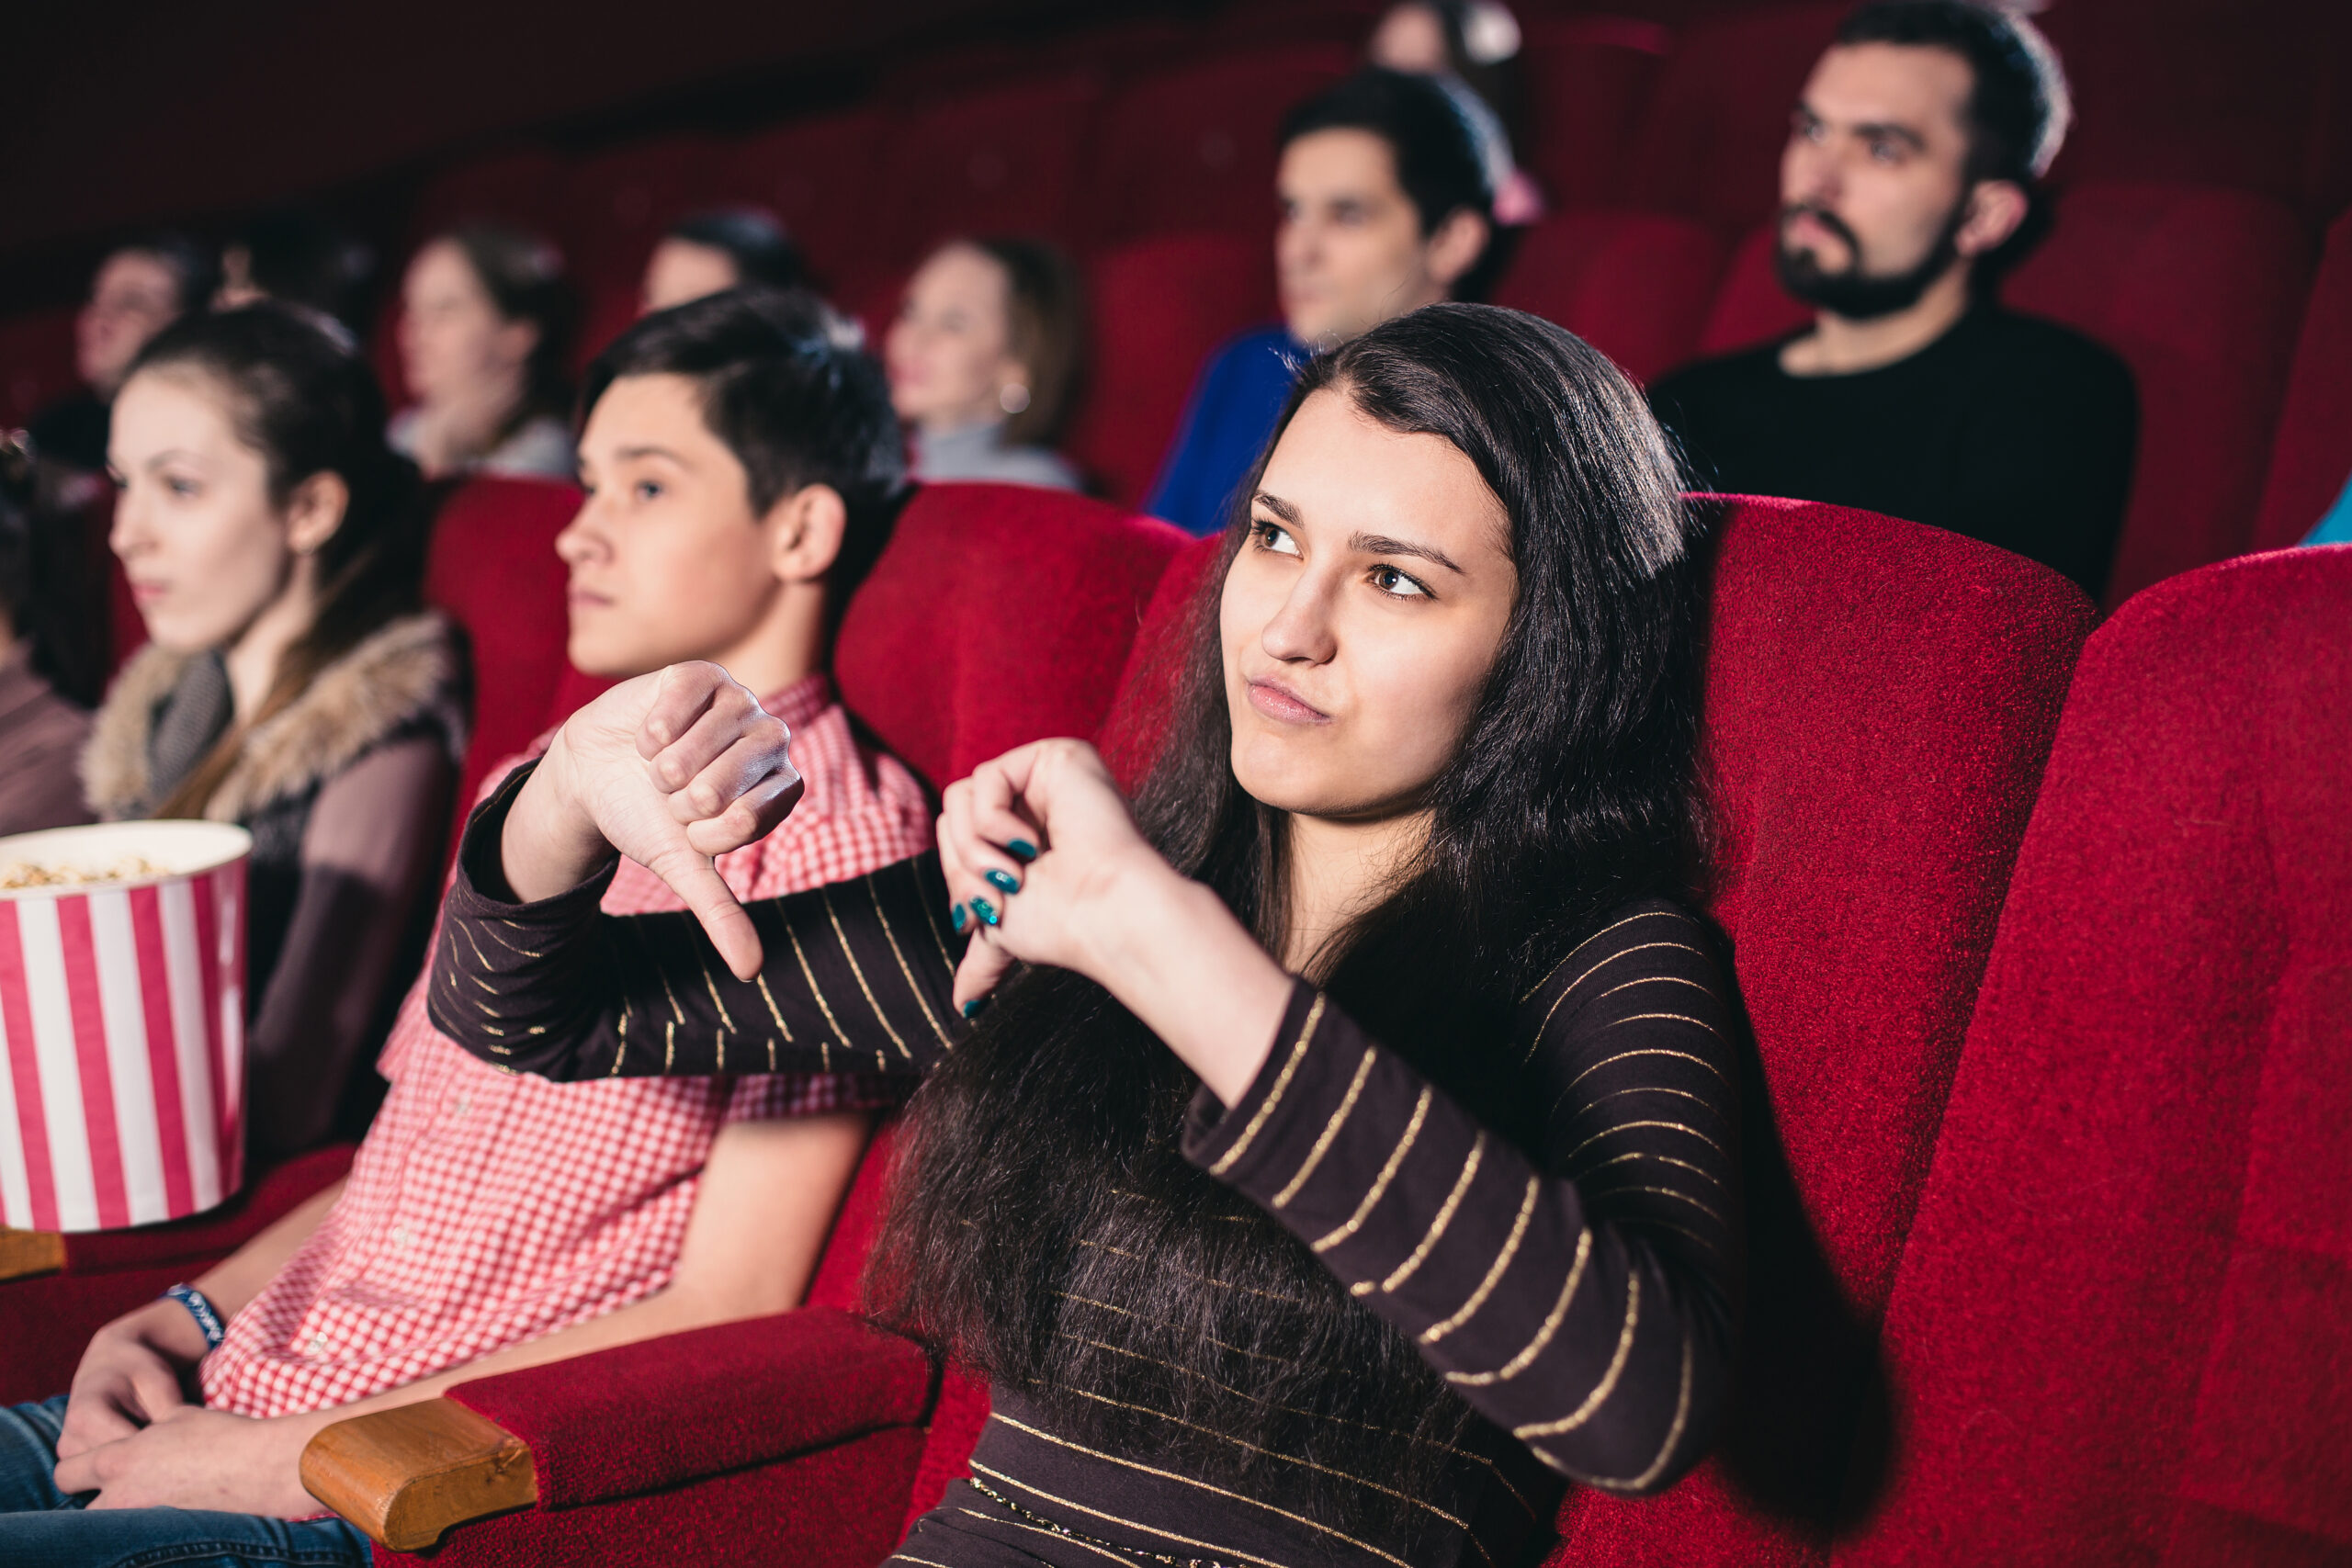 Girl in a movie theater giving a thumbs down sign to a movie she doesn't like